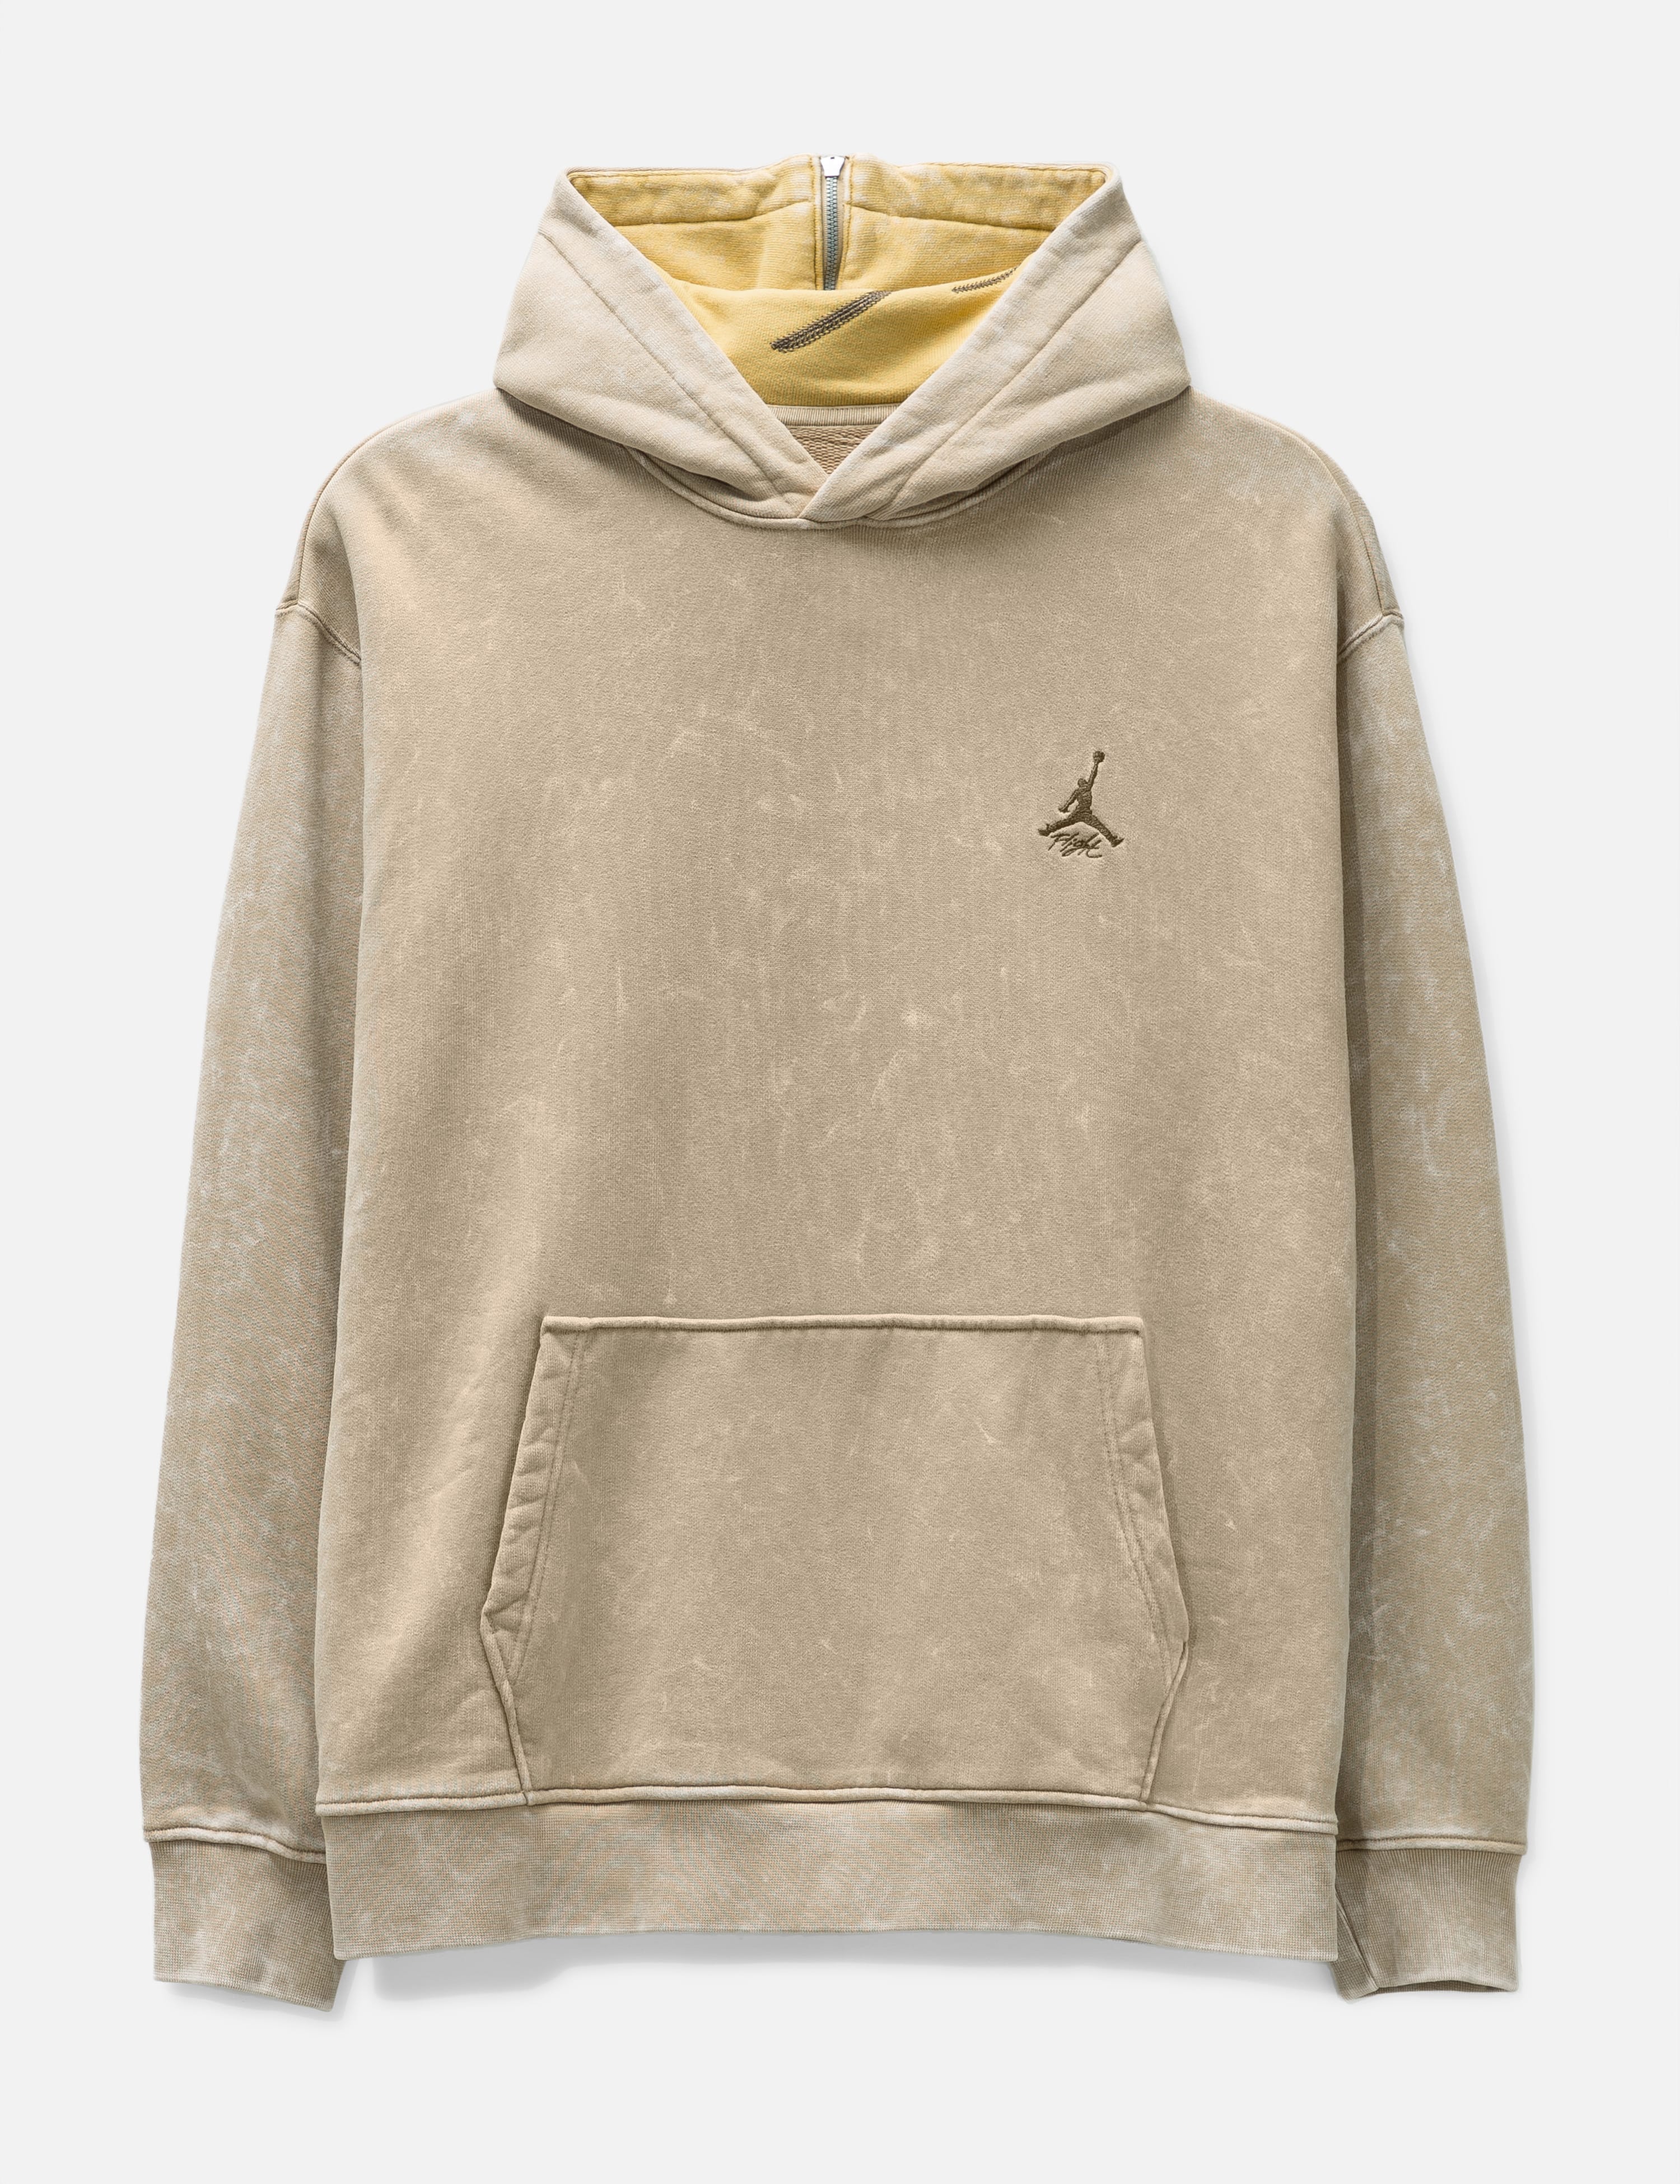 Girls Don't Cry - GDC Cafe Hoodie | HBX - Globally Curated Fashion